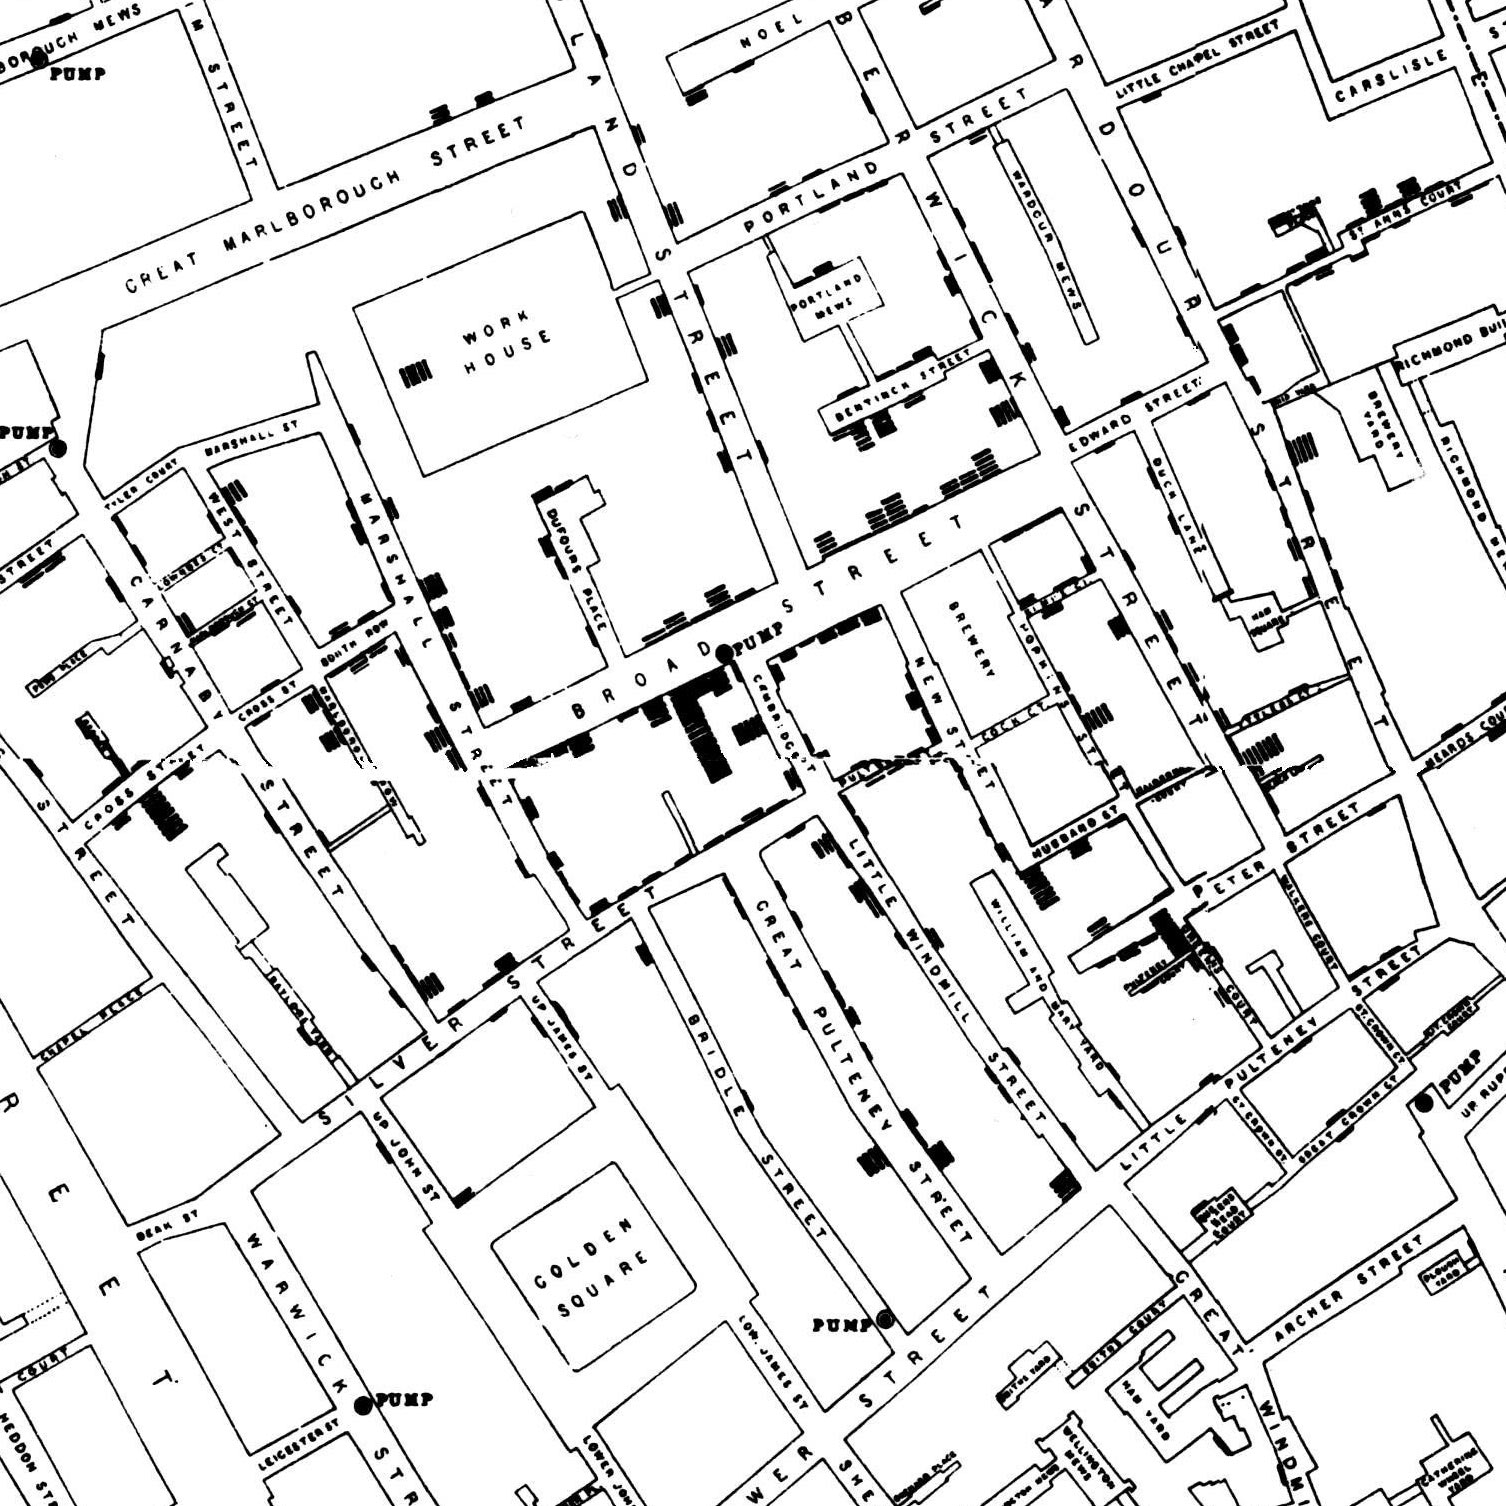 Detail of John Snow’s map of Cholera in the Broad Street outbreak in 1854. Each bar represents one death in a topography that attempted to relate the water source (“Pump”) to pattern of cases in the neighborhood outbreak.